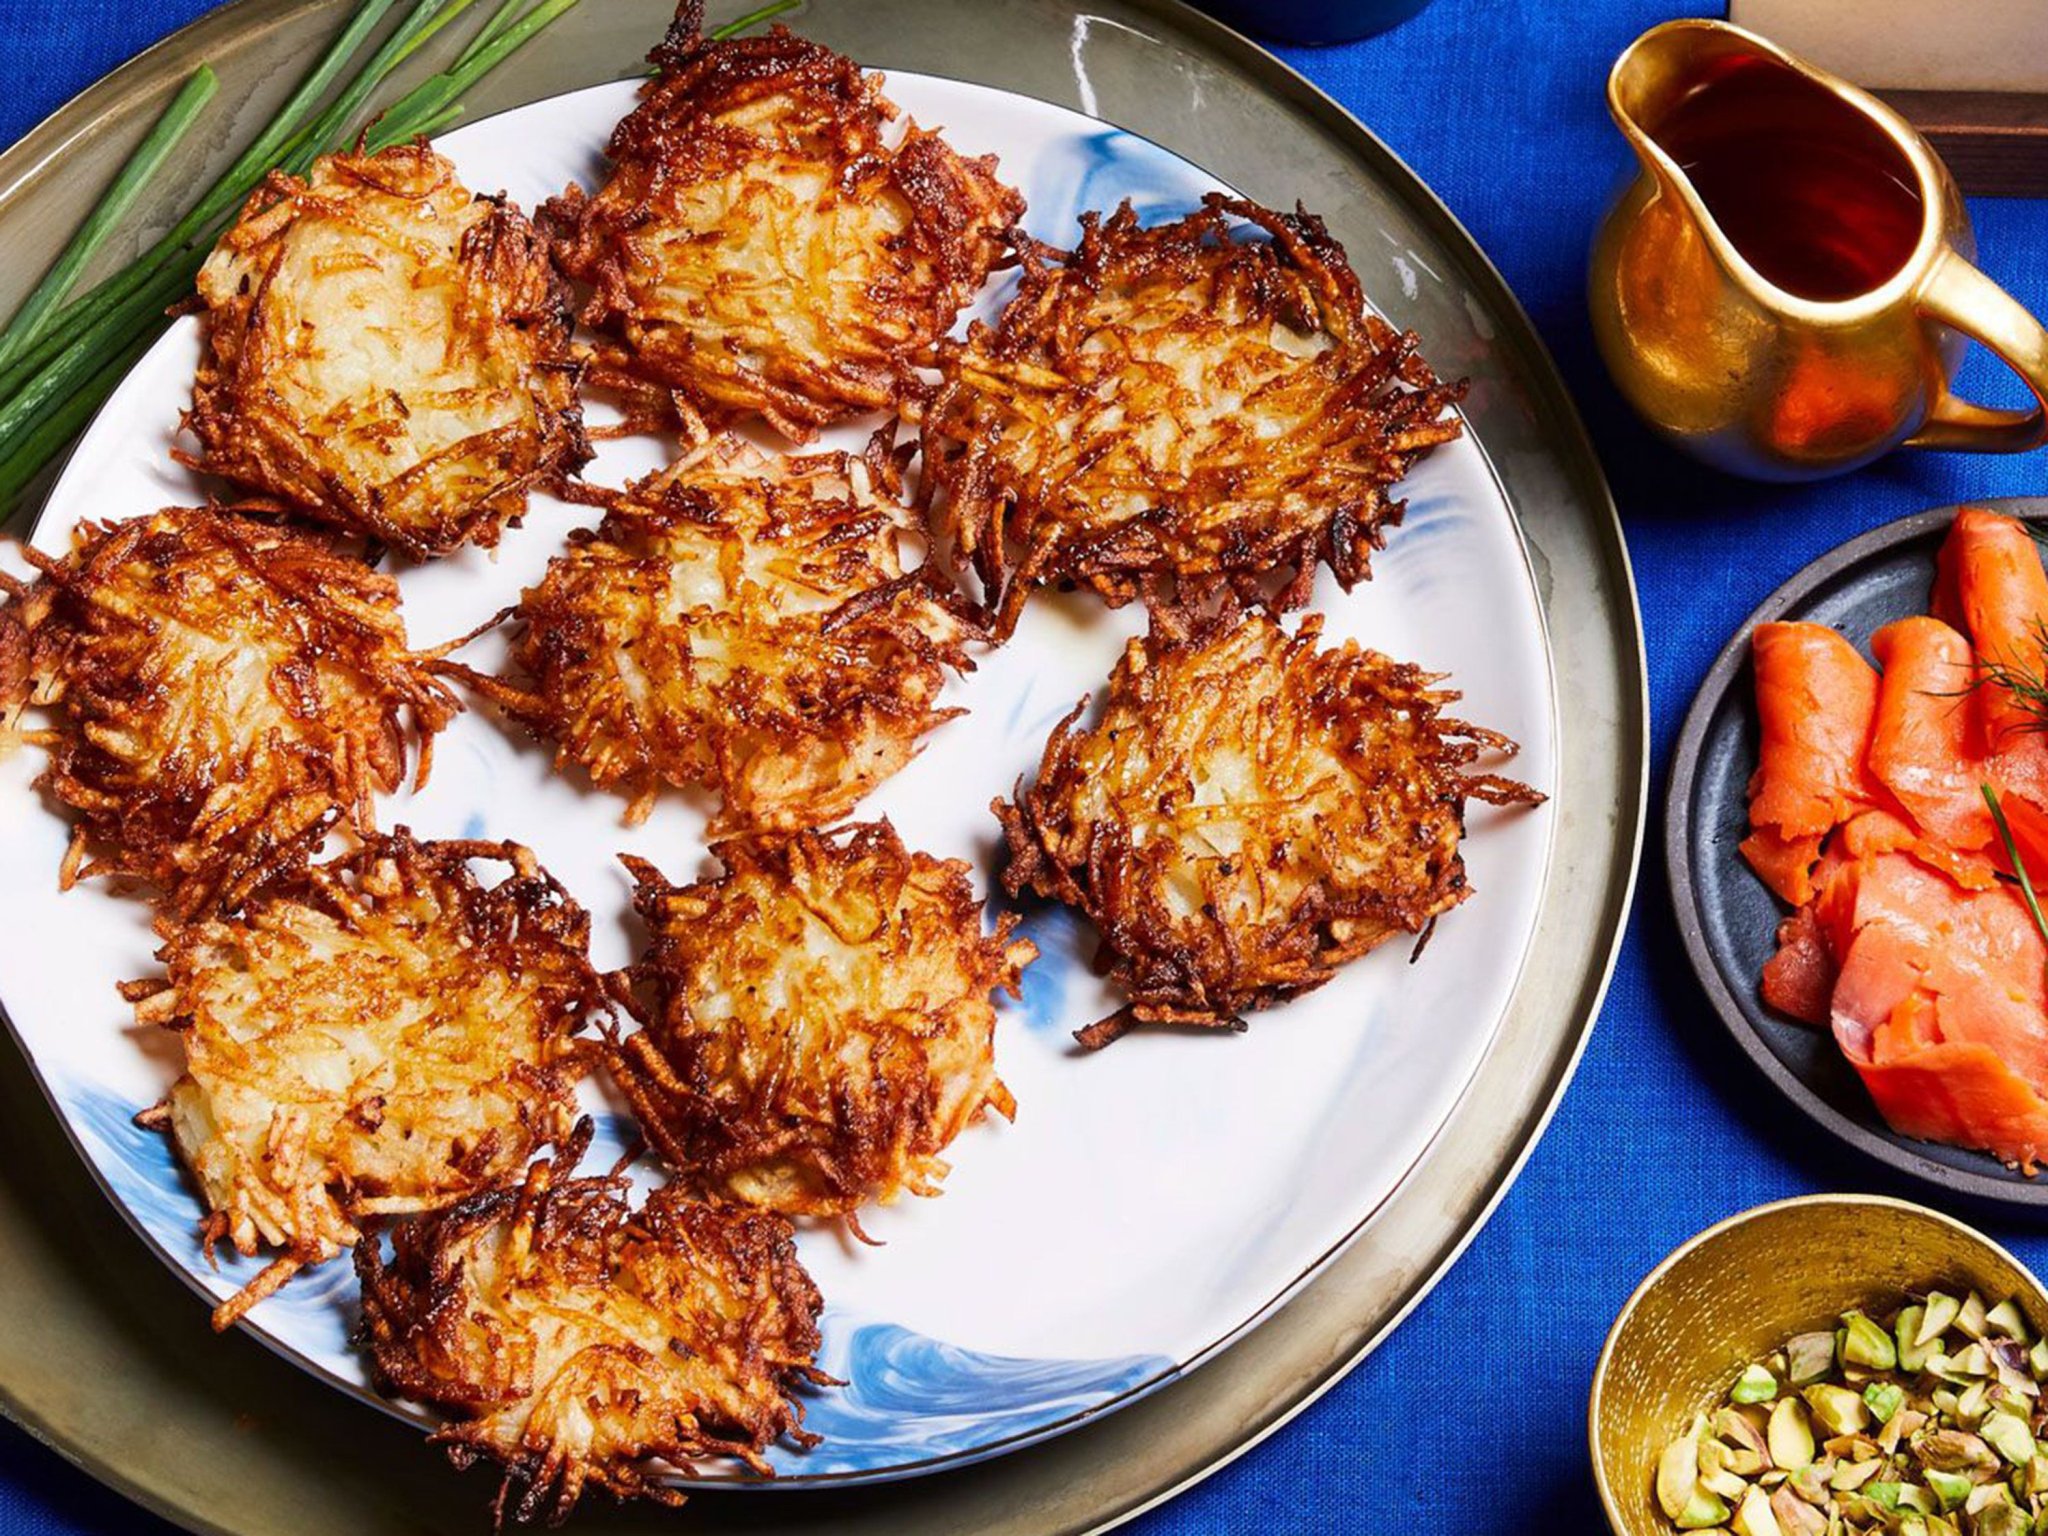 Here's How to Make Latkes Without Your House Smelling Like Oil This Hanukkah